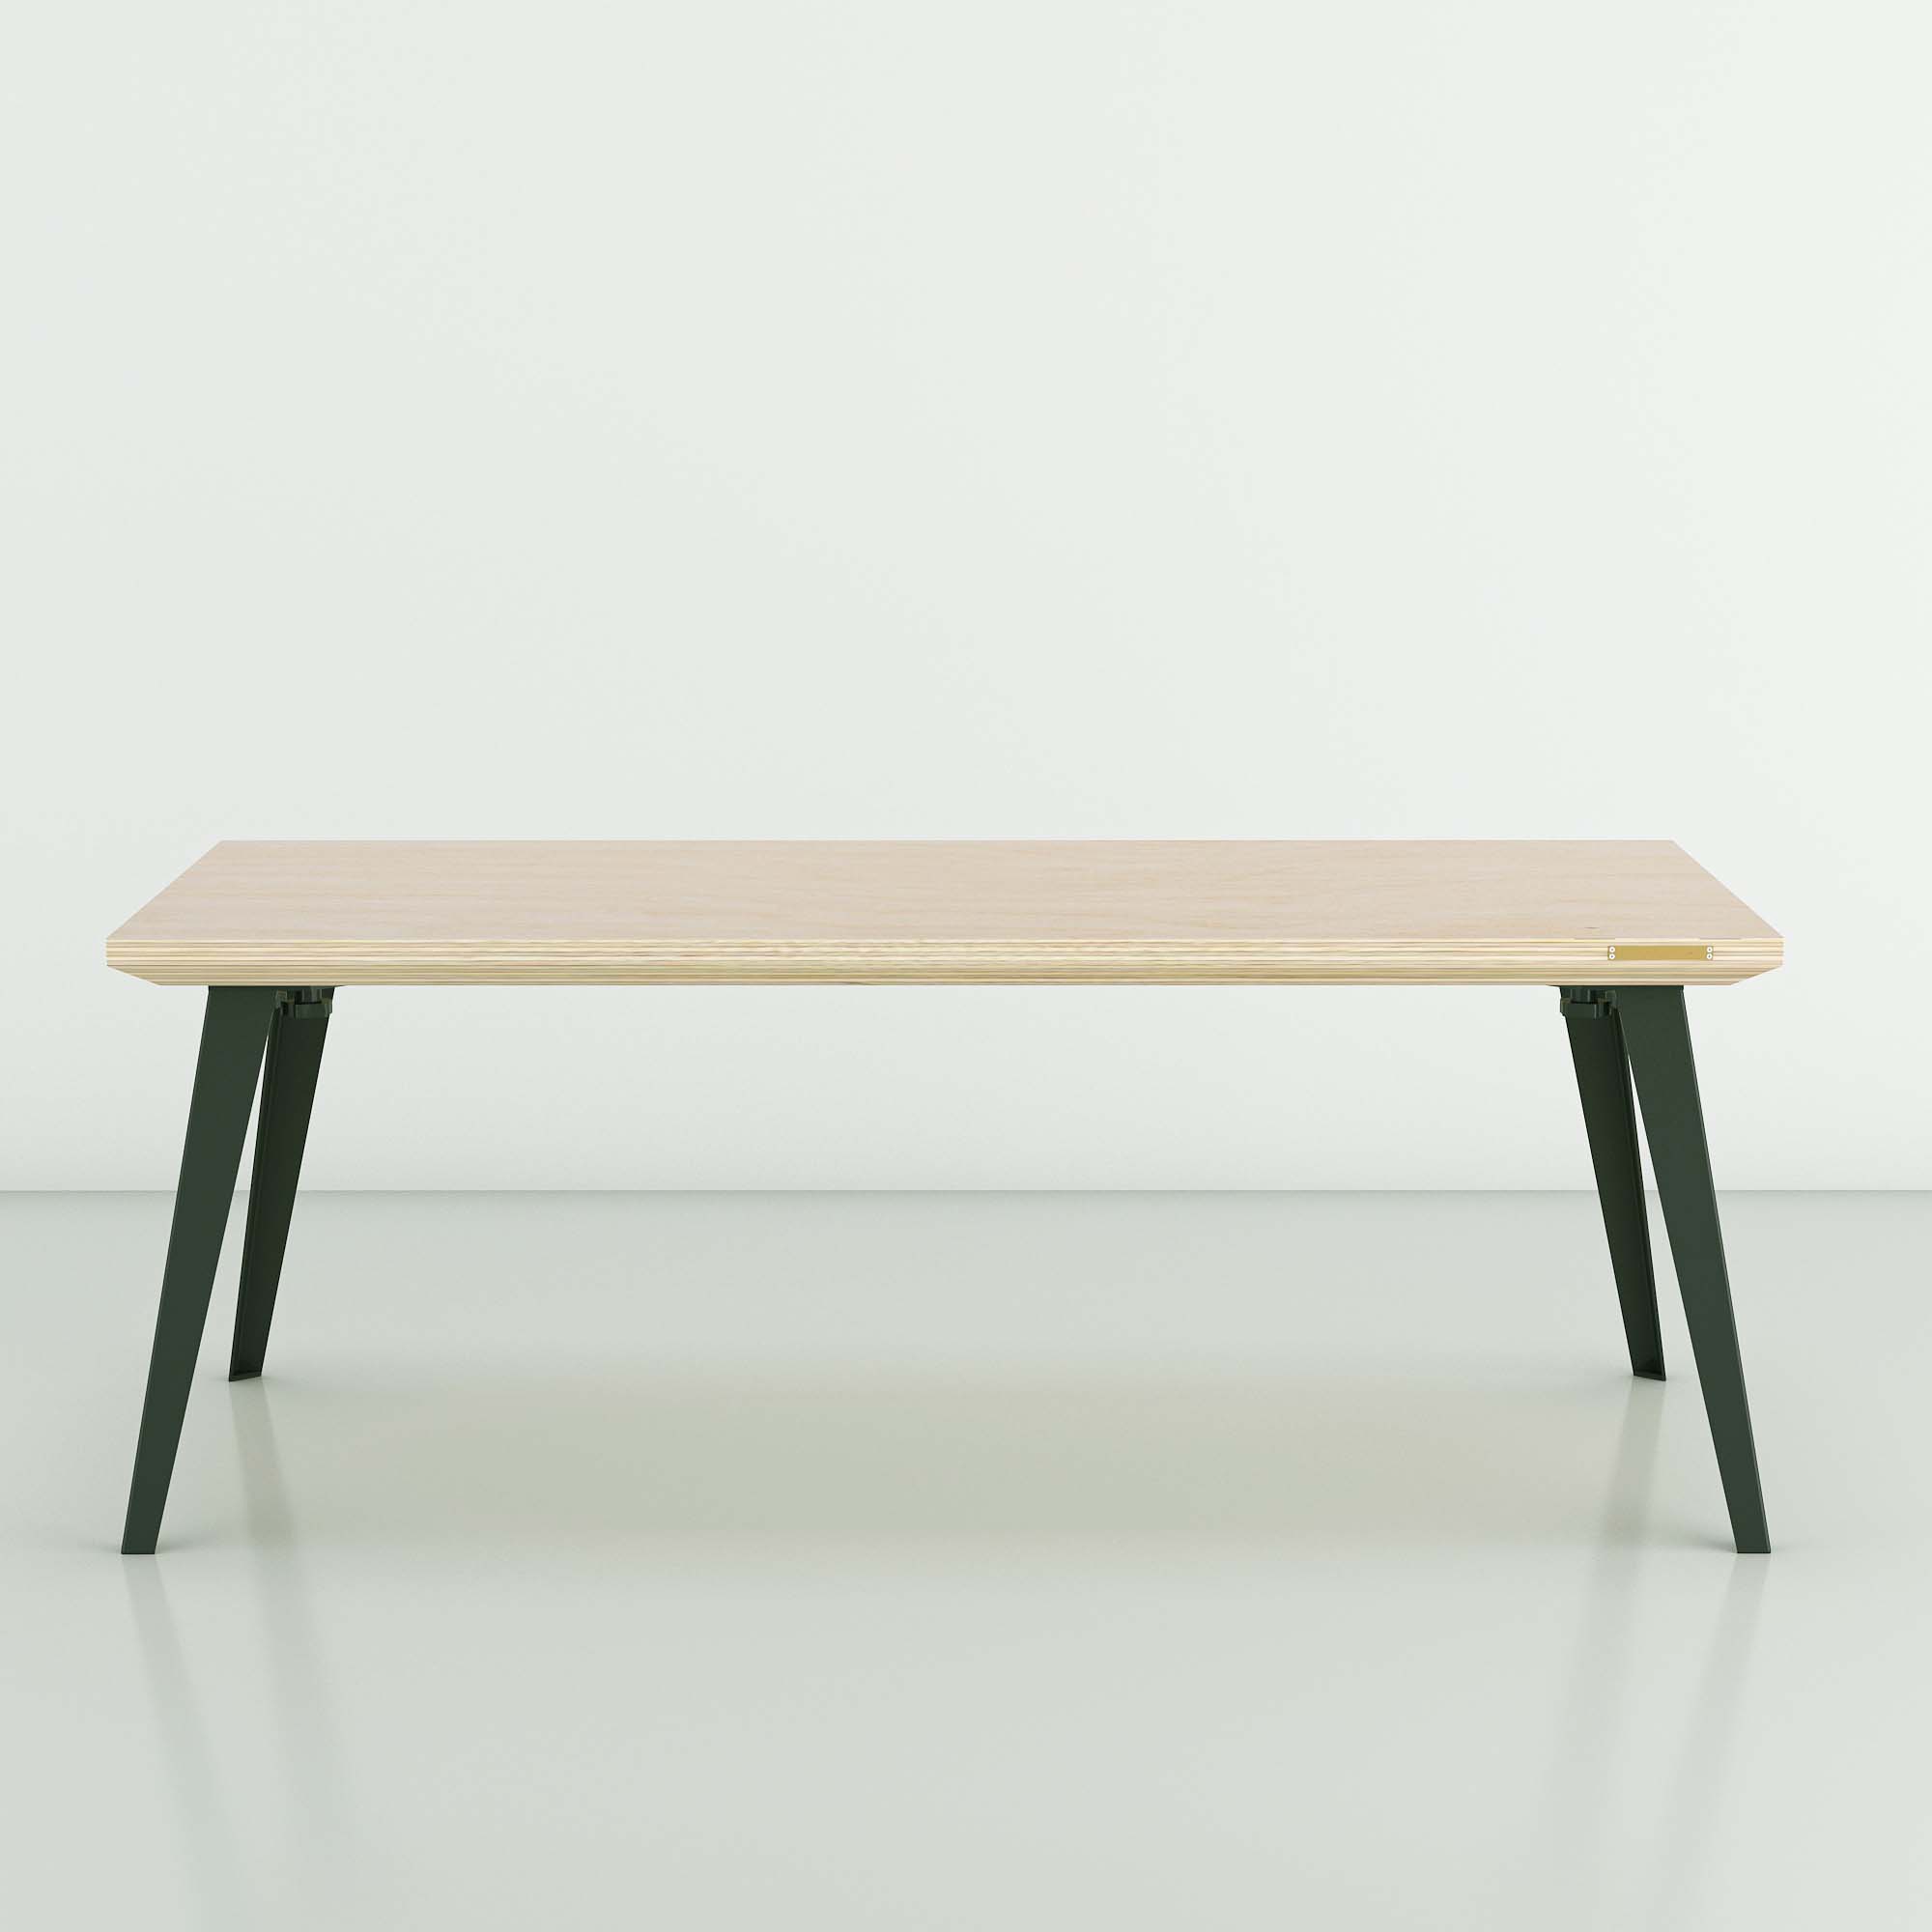 Coffee Table (4x2 ft) - Natural Birch Surface & Black Legs ...